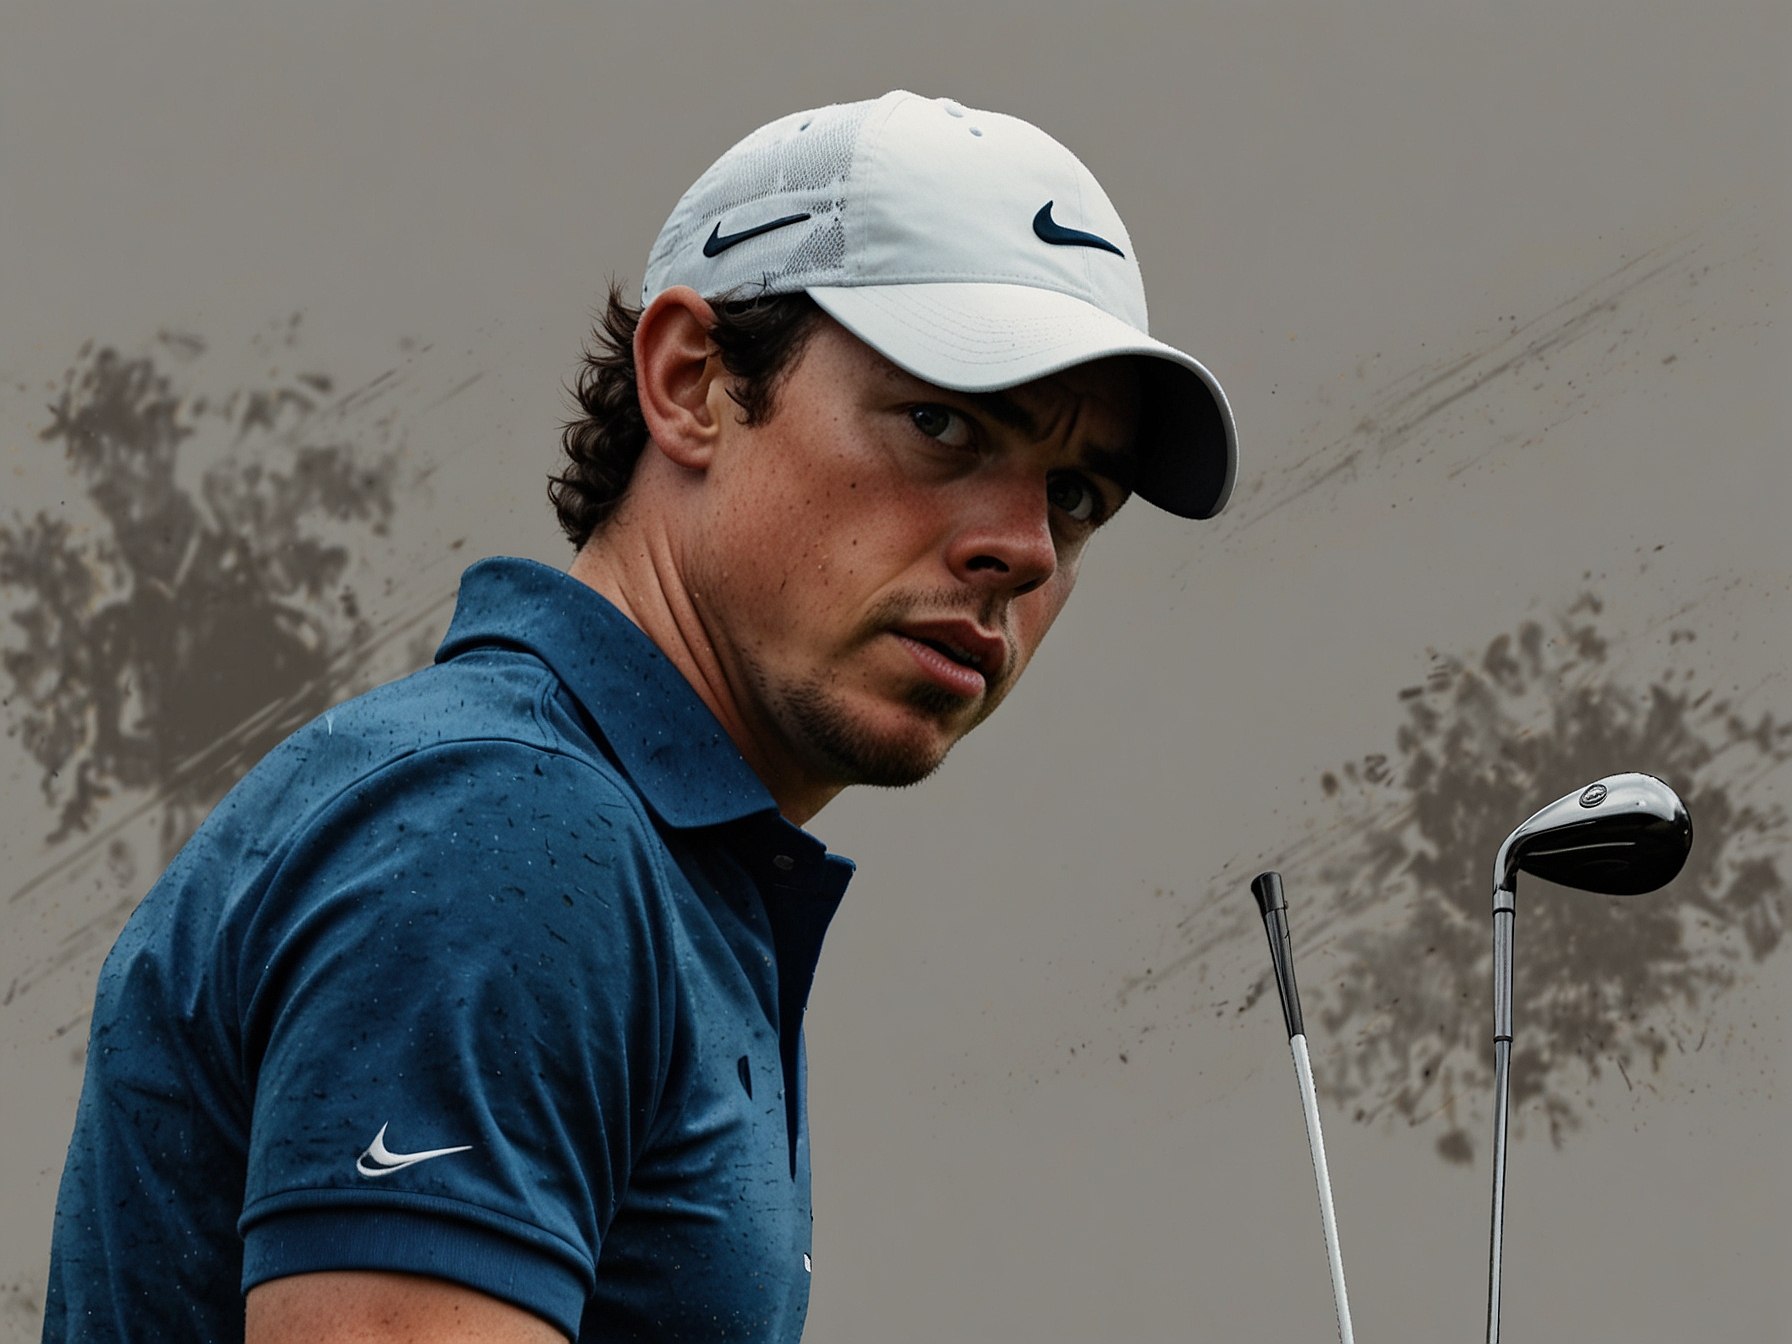 Rory McIlroy during the final round of a major golf tournament, visibly tense and struggling to maintain his lead with each missed putt and wayward drive.